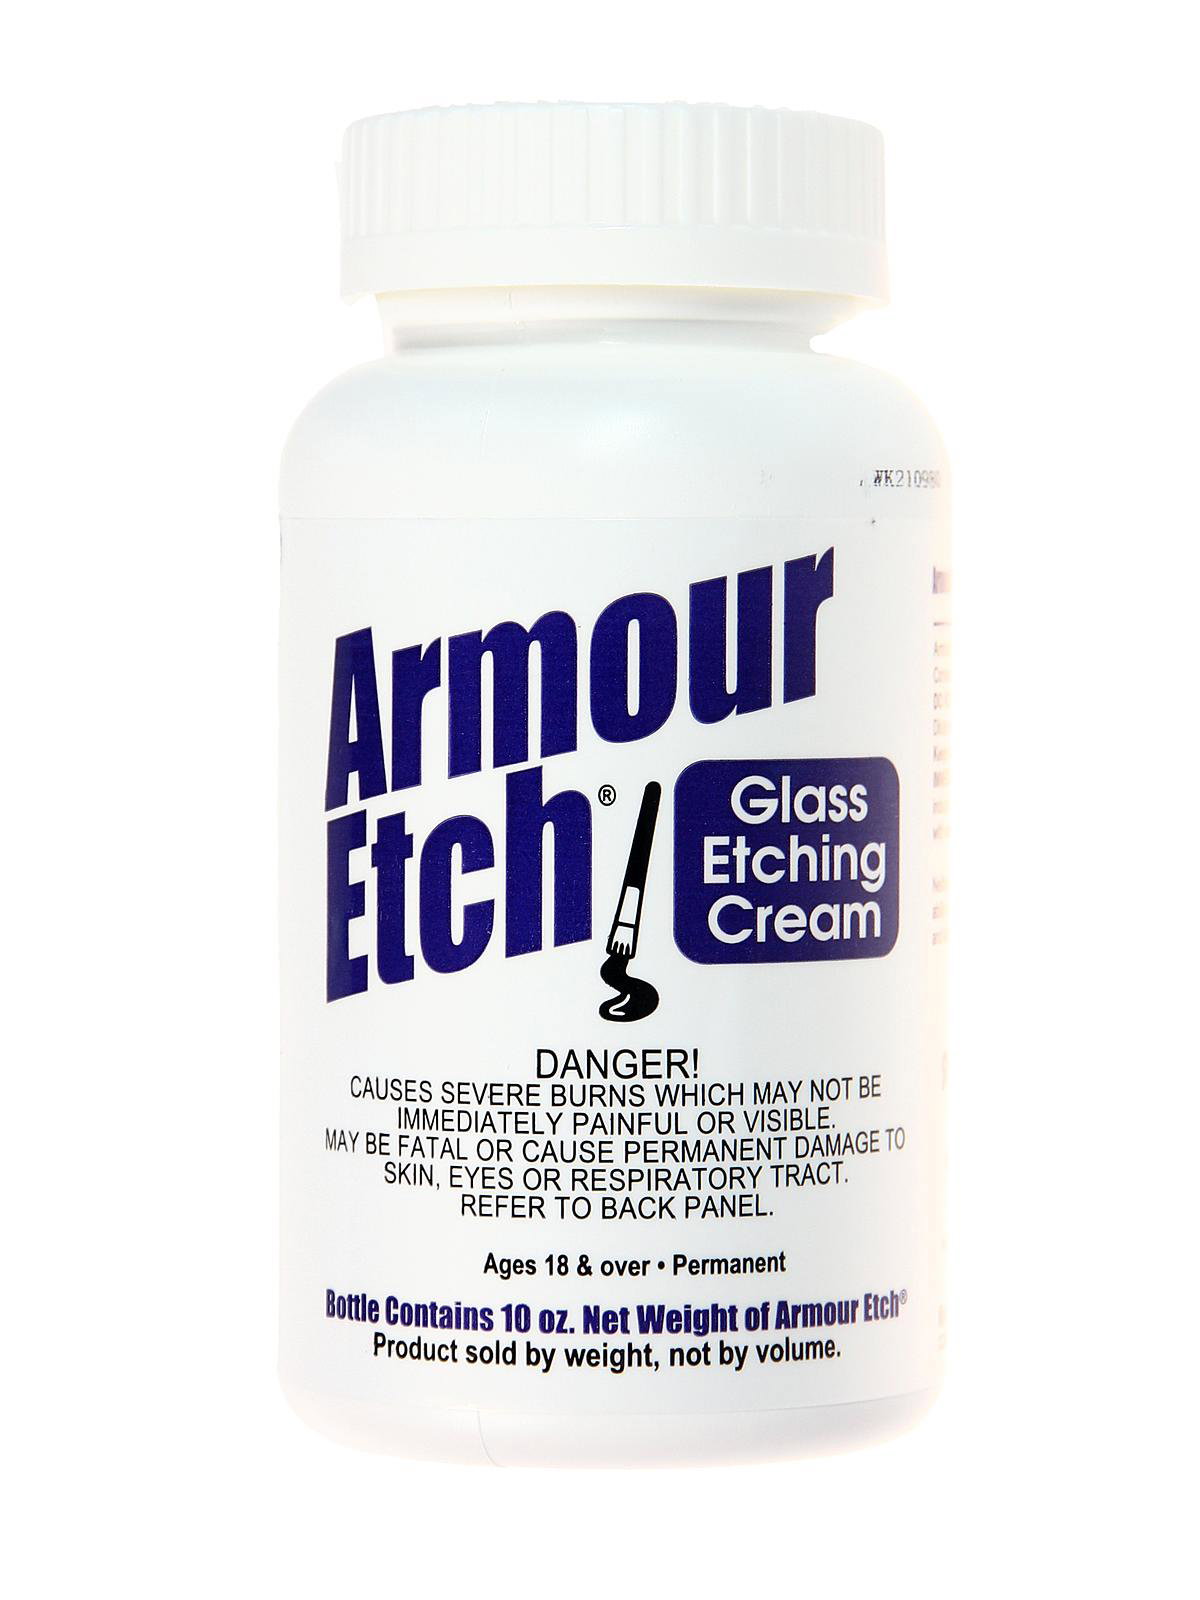 Ultimate Etch Glass Etching Cream 80g Bottle